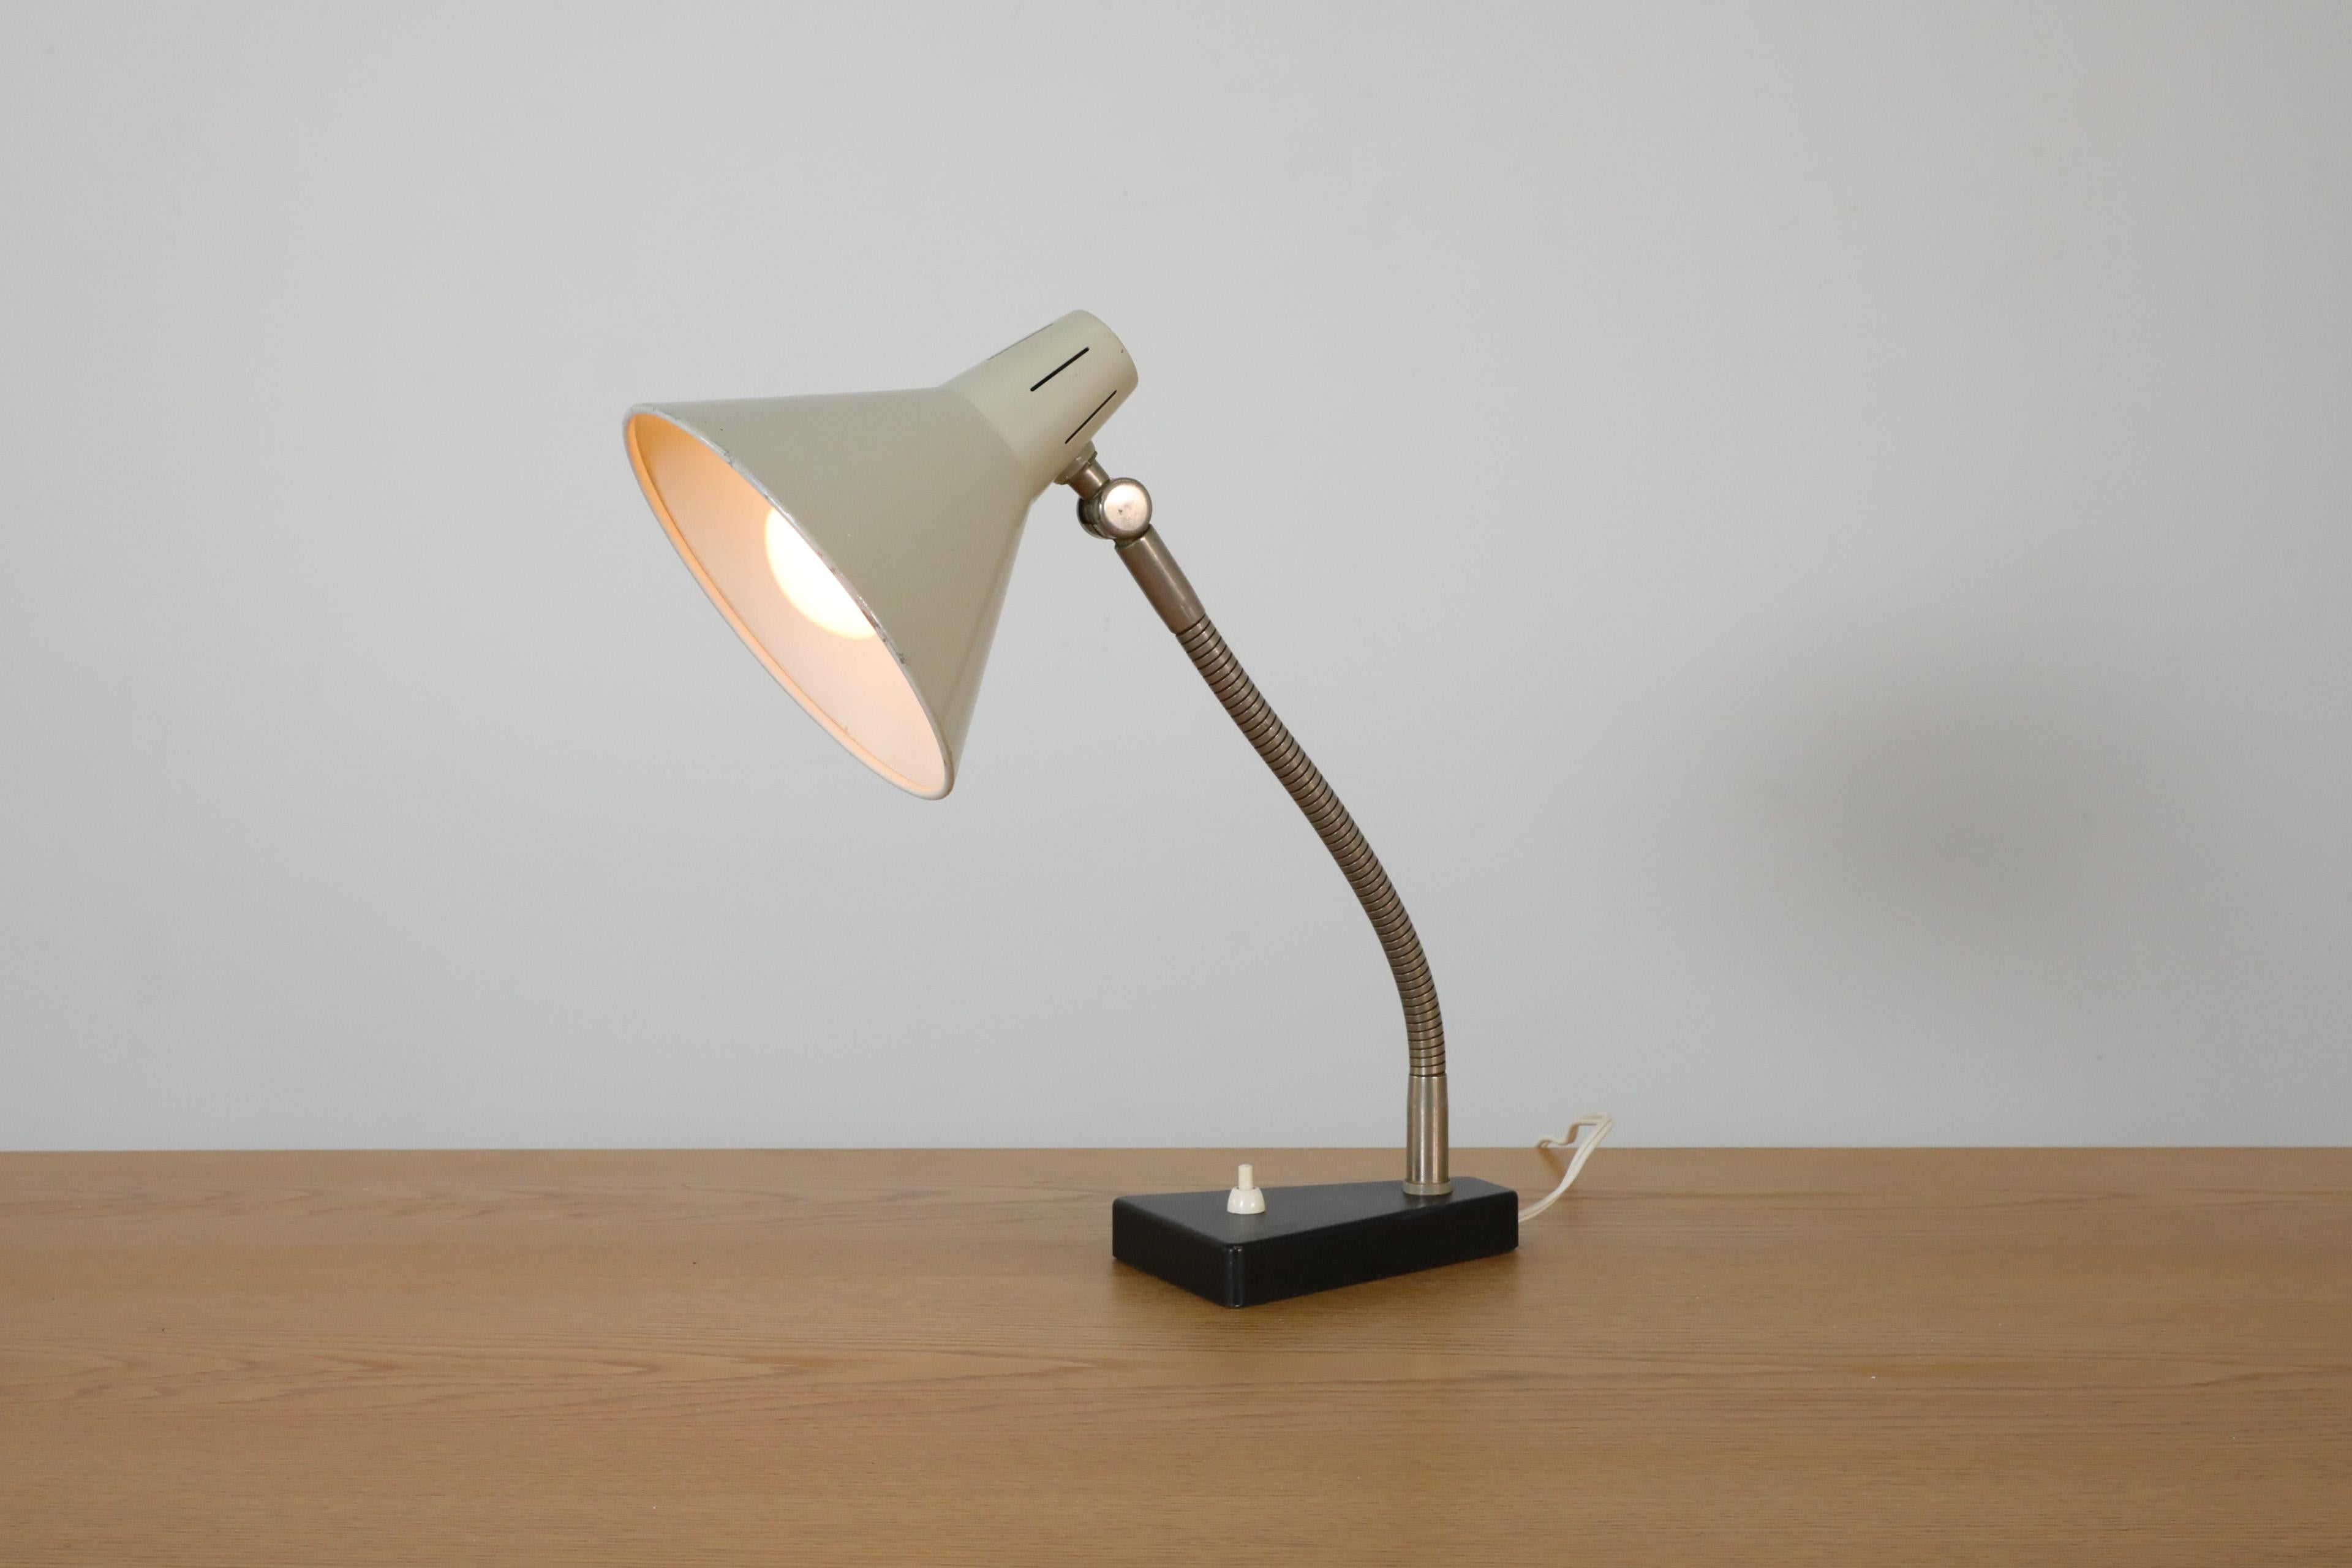 Dutch, Mid-Century, Hala Zeist manufactured table lamp with an adjustable gray enameled shade and a chrome gooseneck stem on top of a black base. A cute table lamp perfect for adding a touch of style and ambient directional light to a desk or side